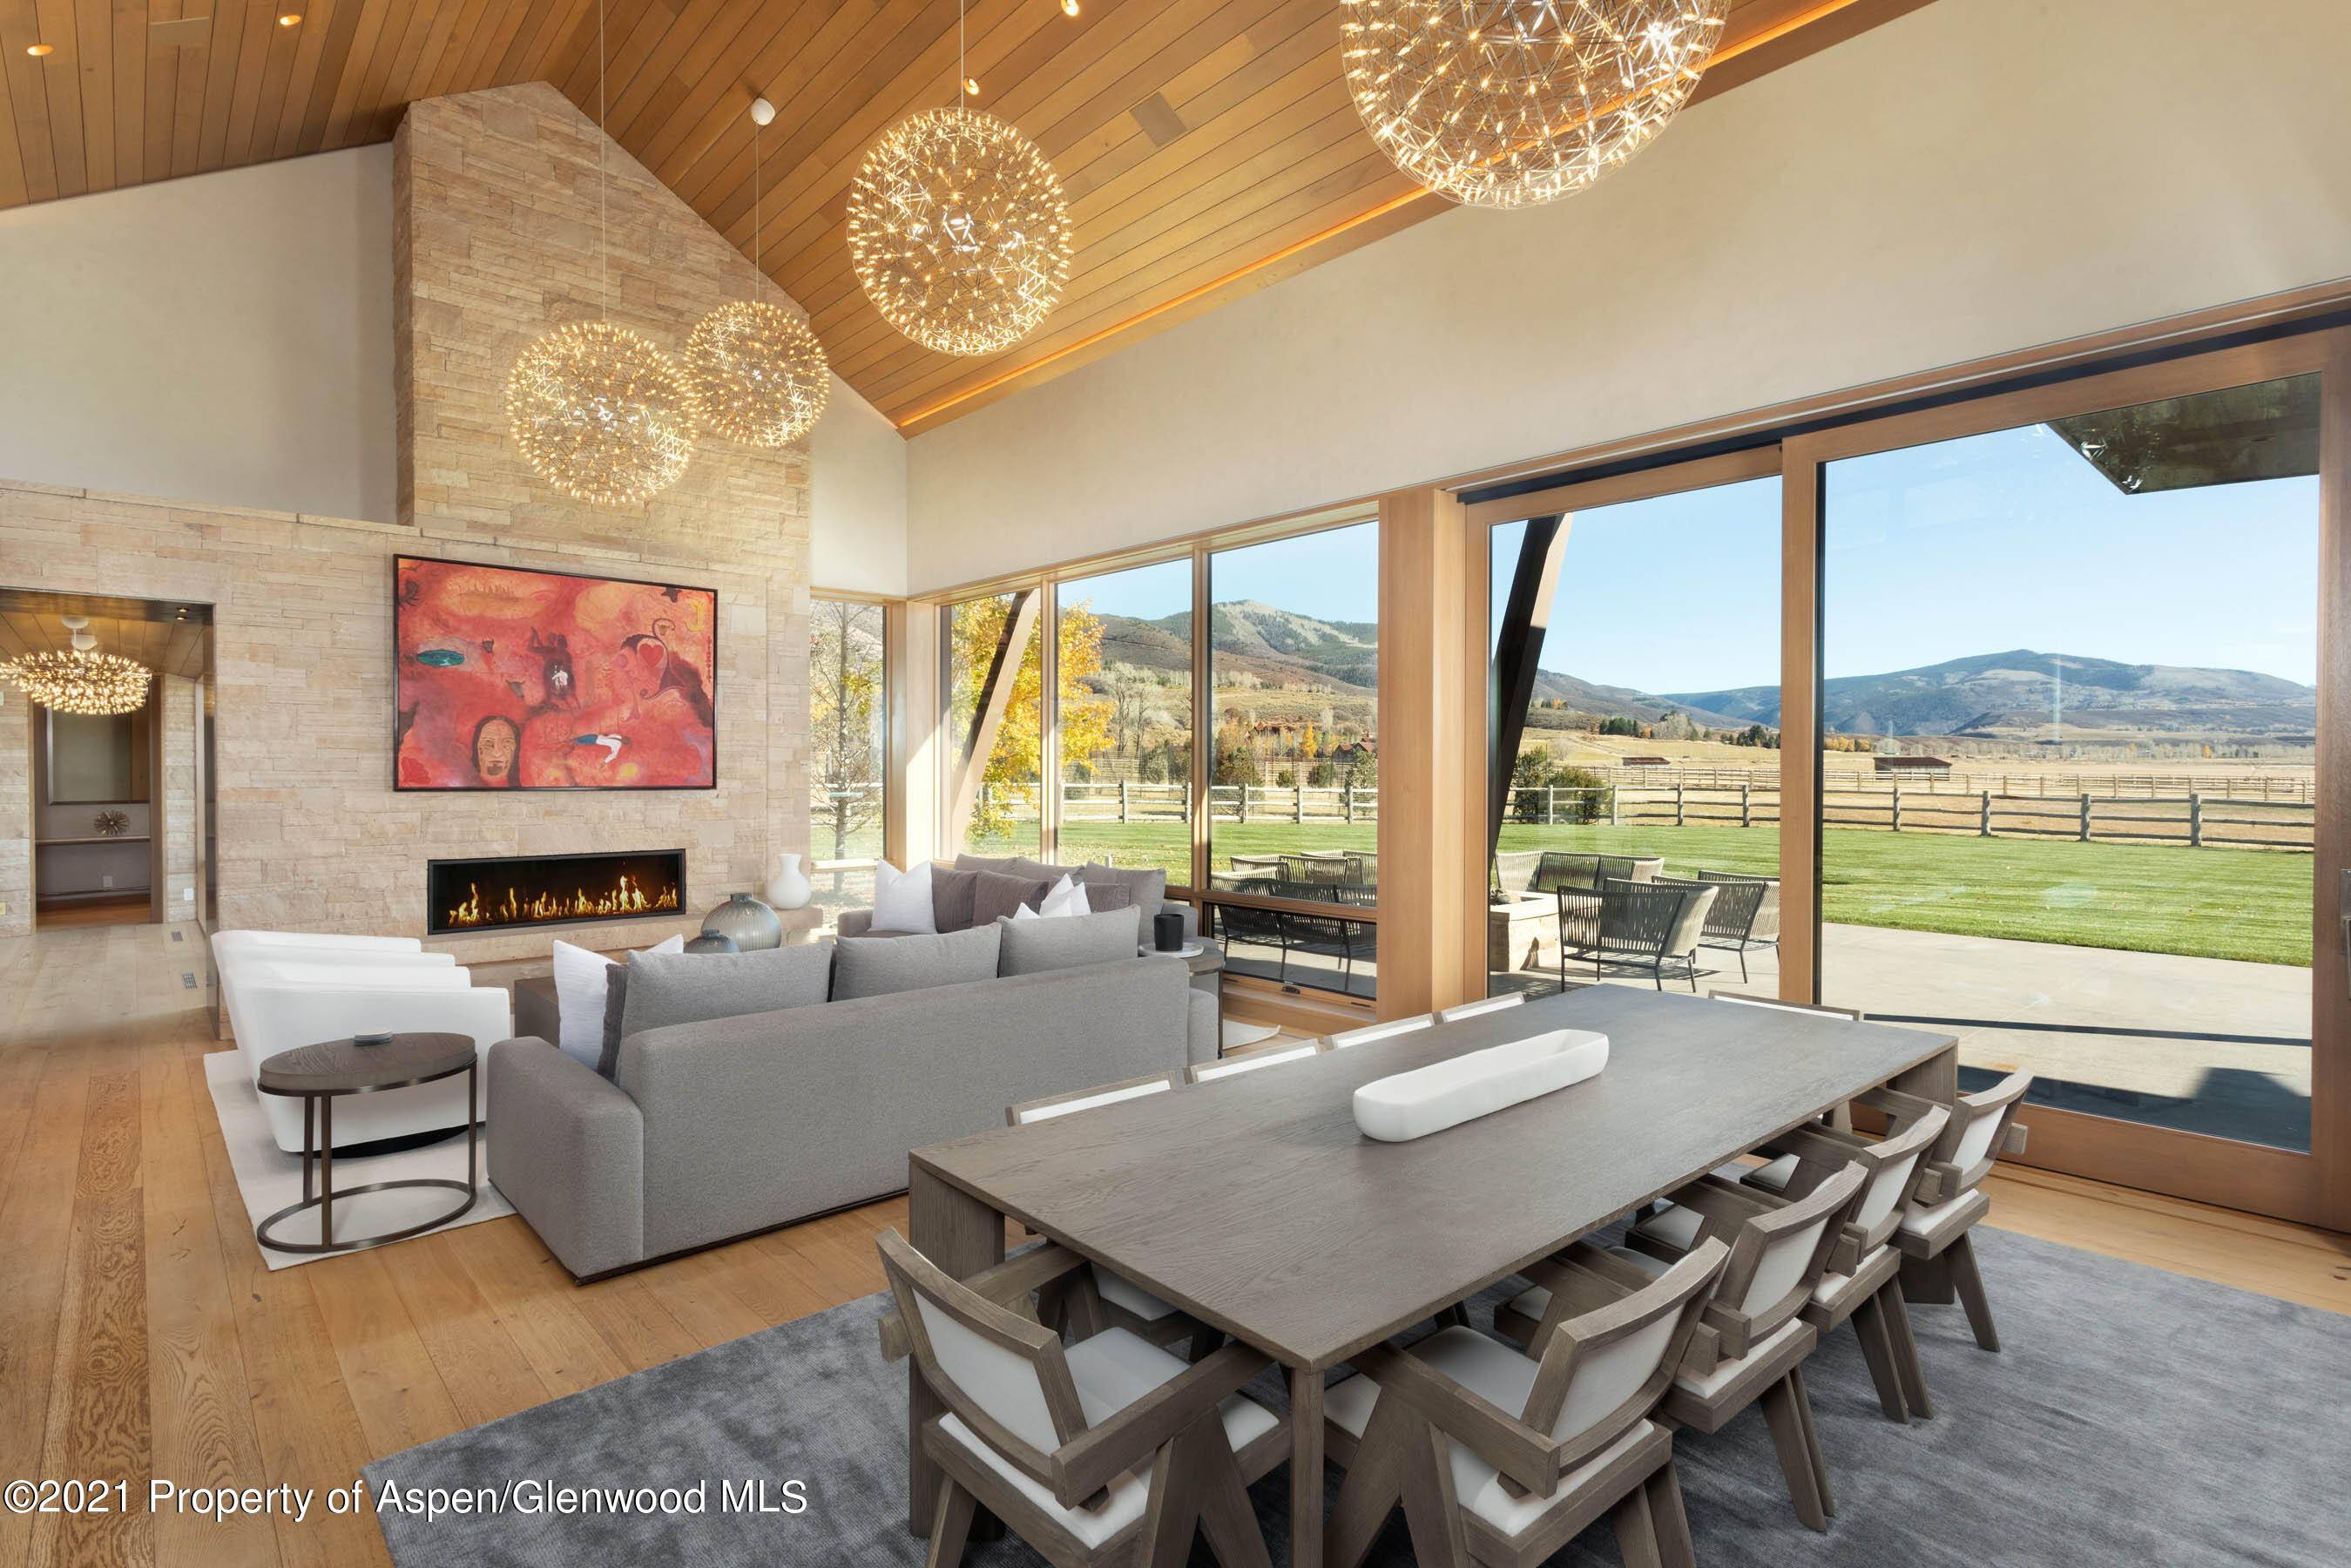 Aspen Valley Ranch is Aspen's only whole ownership private luxury serviced community.